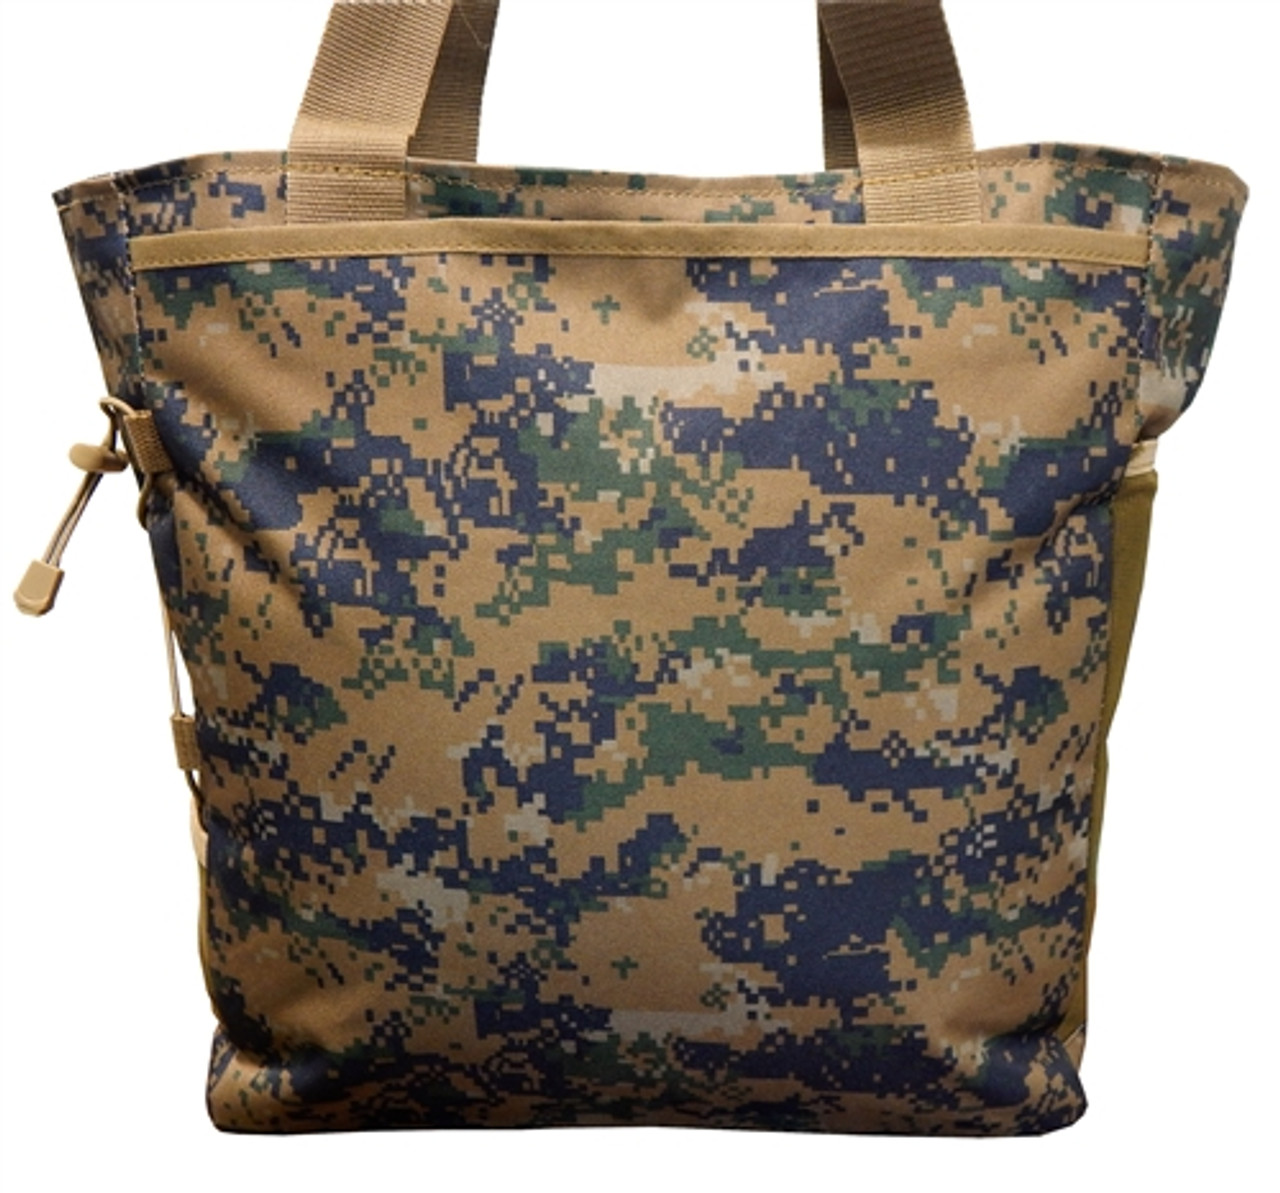 Digital Woodland Deluxe Travel Tote